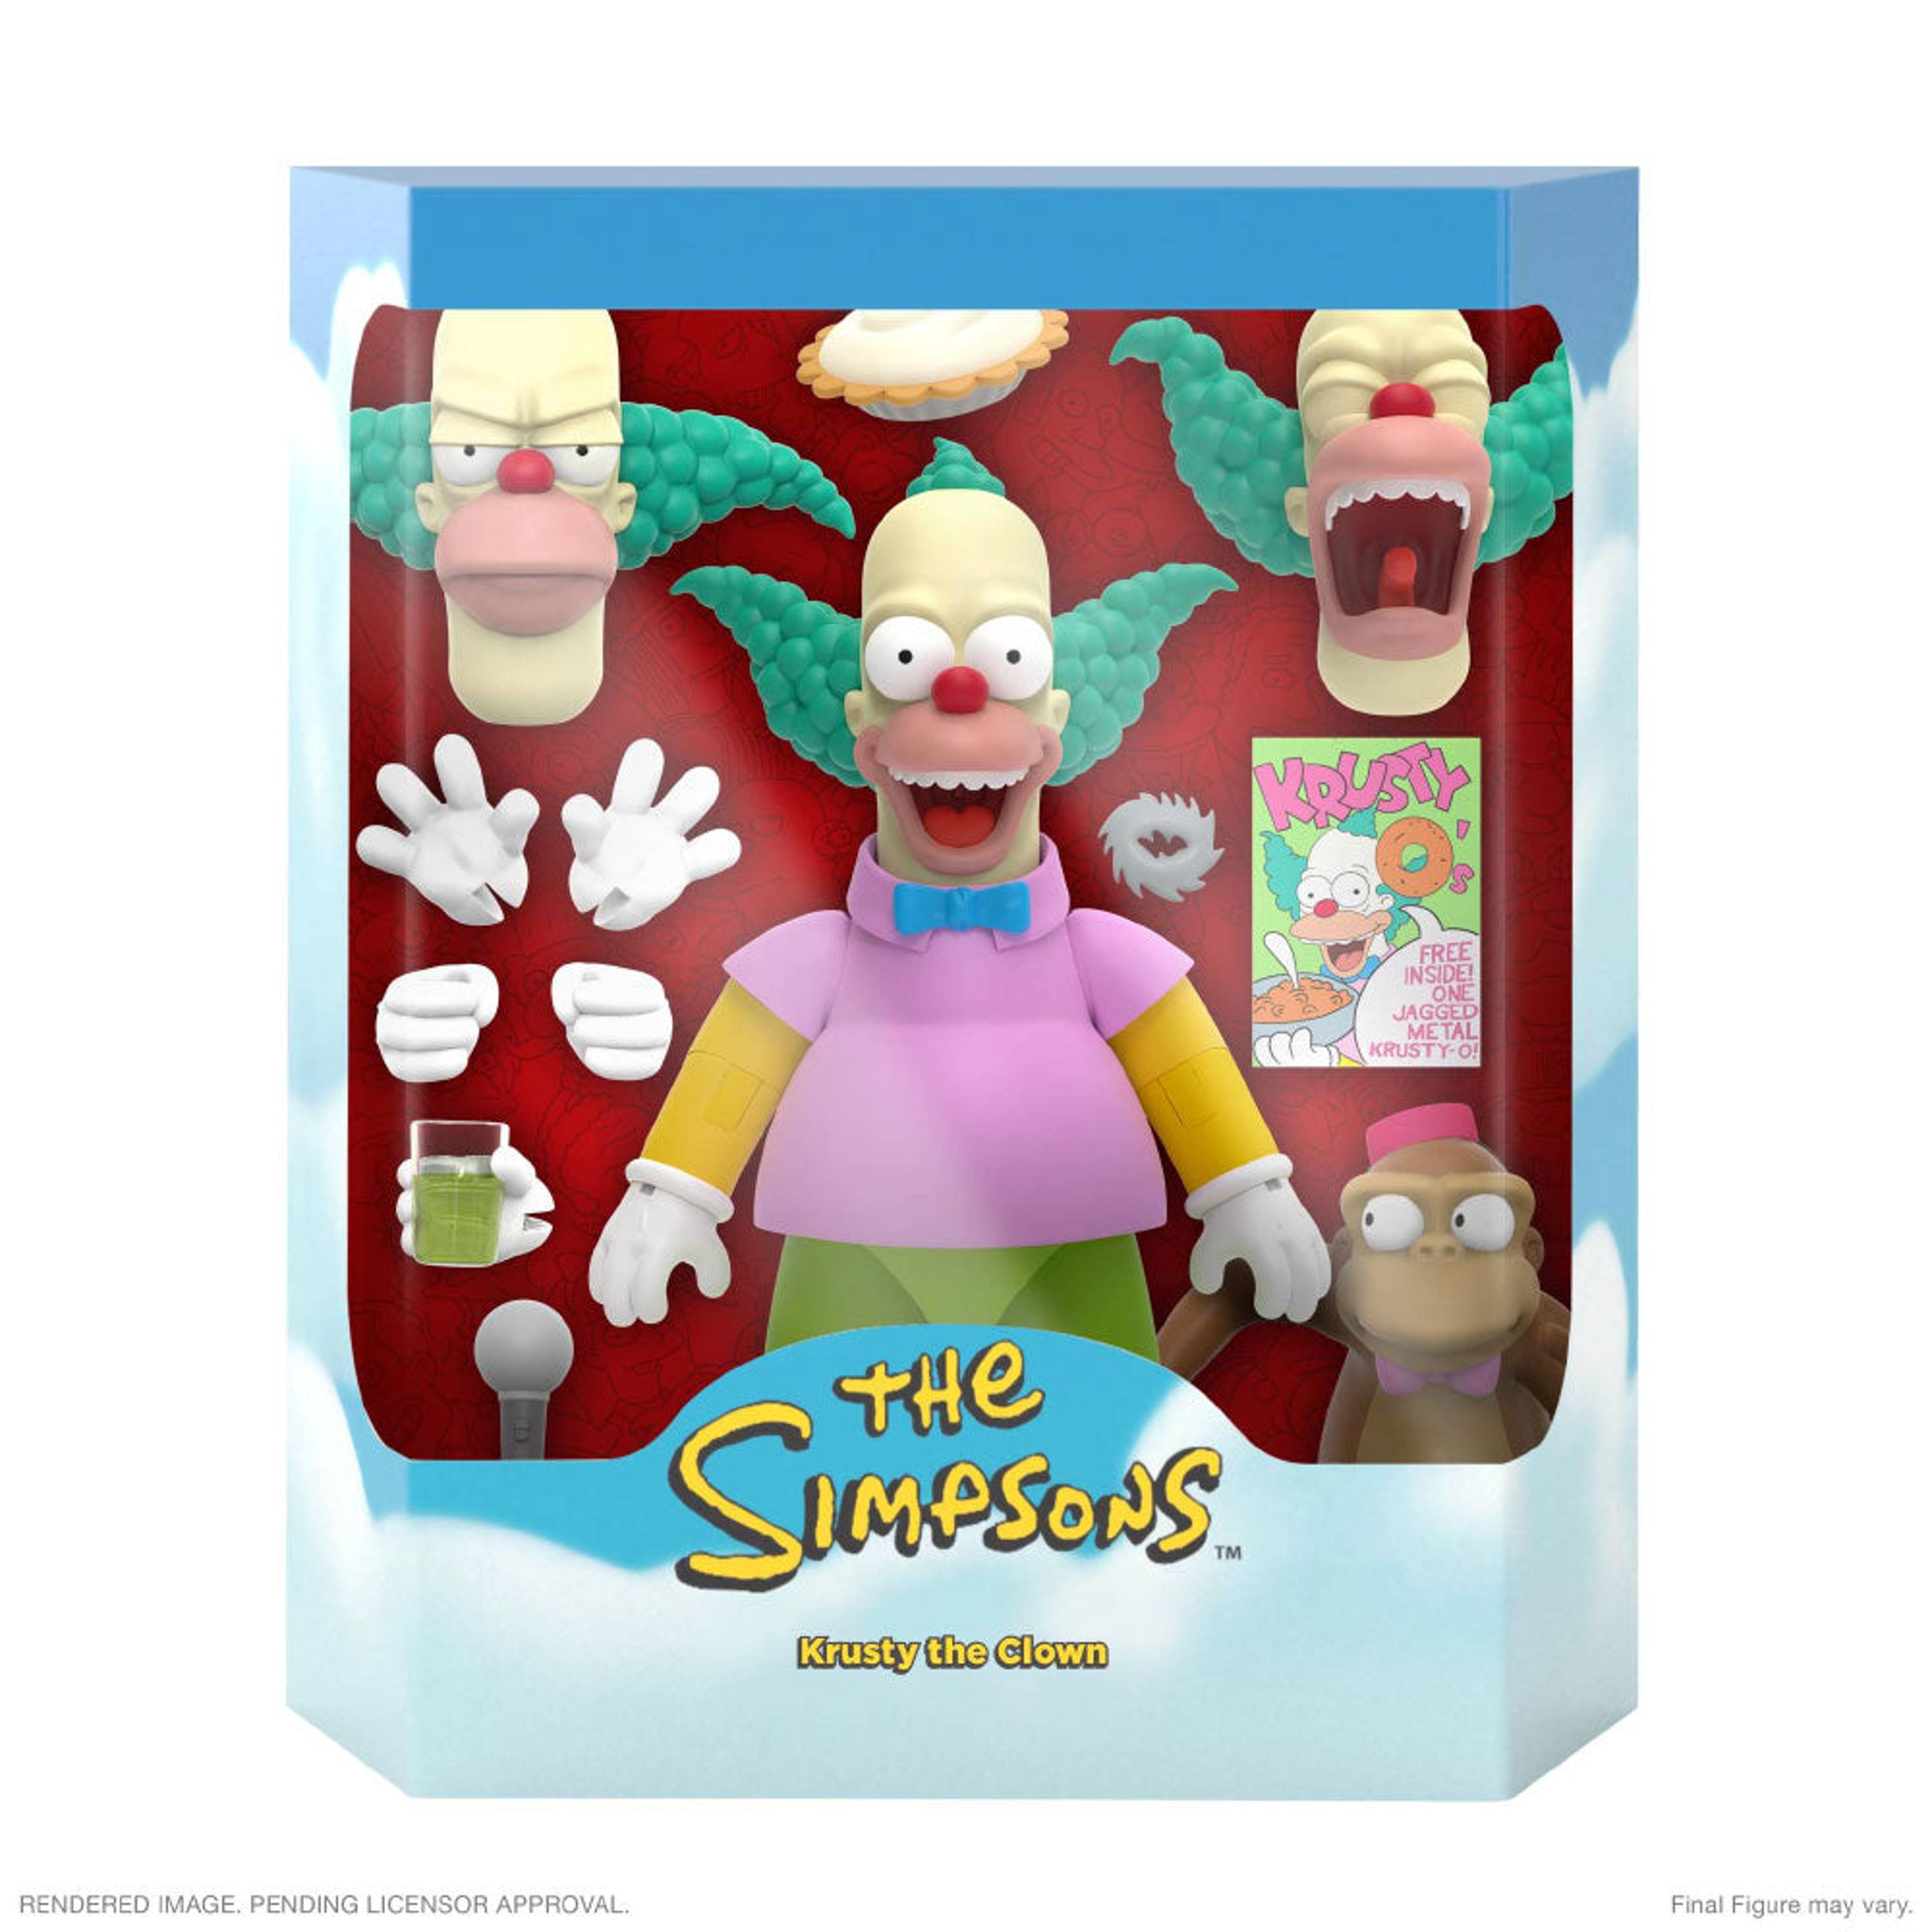 The Simpsons Ultimates Wave 2 Krusty The Clown Action Figure by 